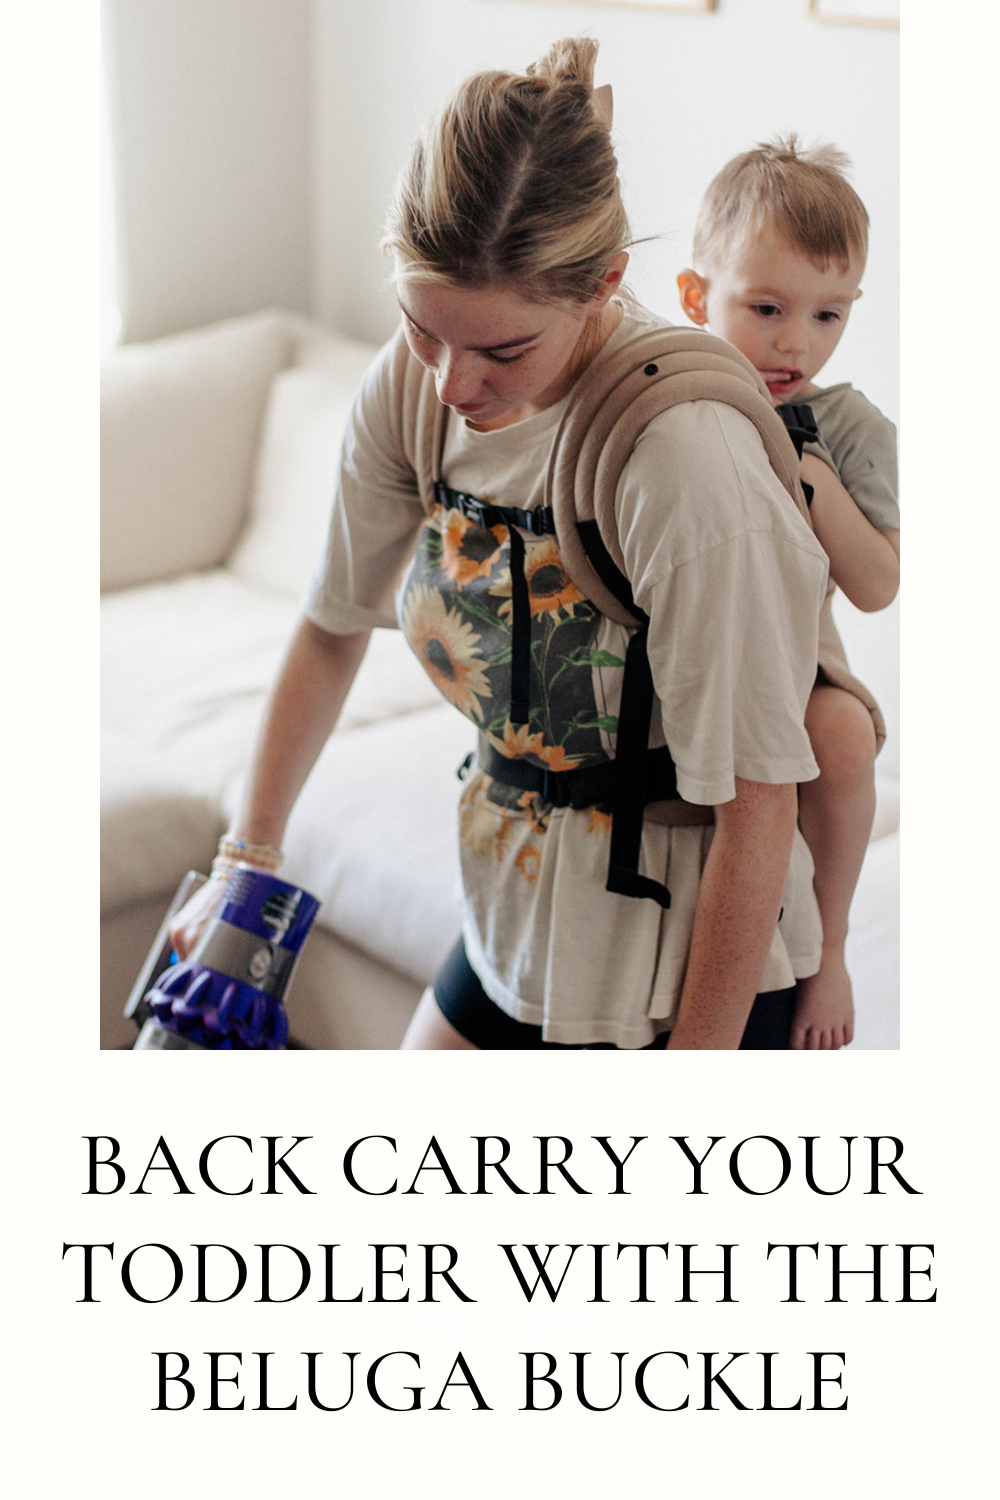 How To Back Carry Your Toddler With The Beluga Buckle